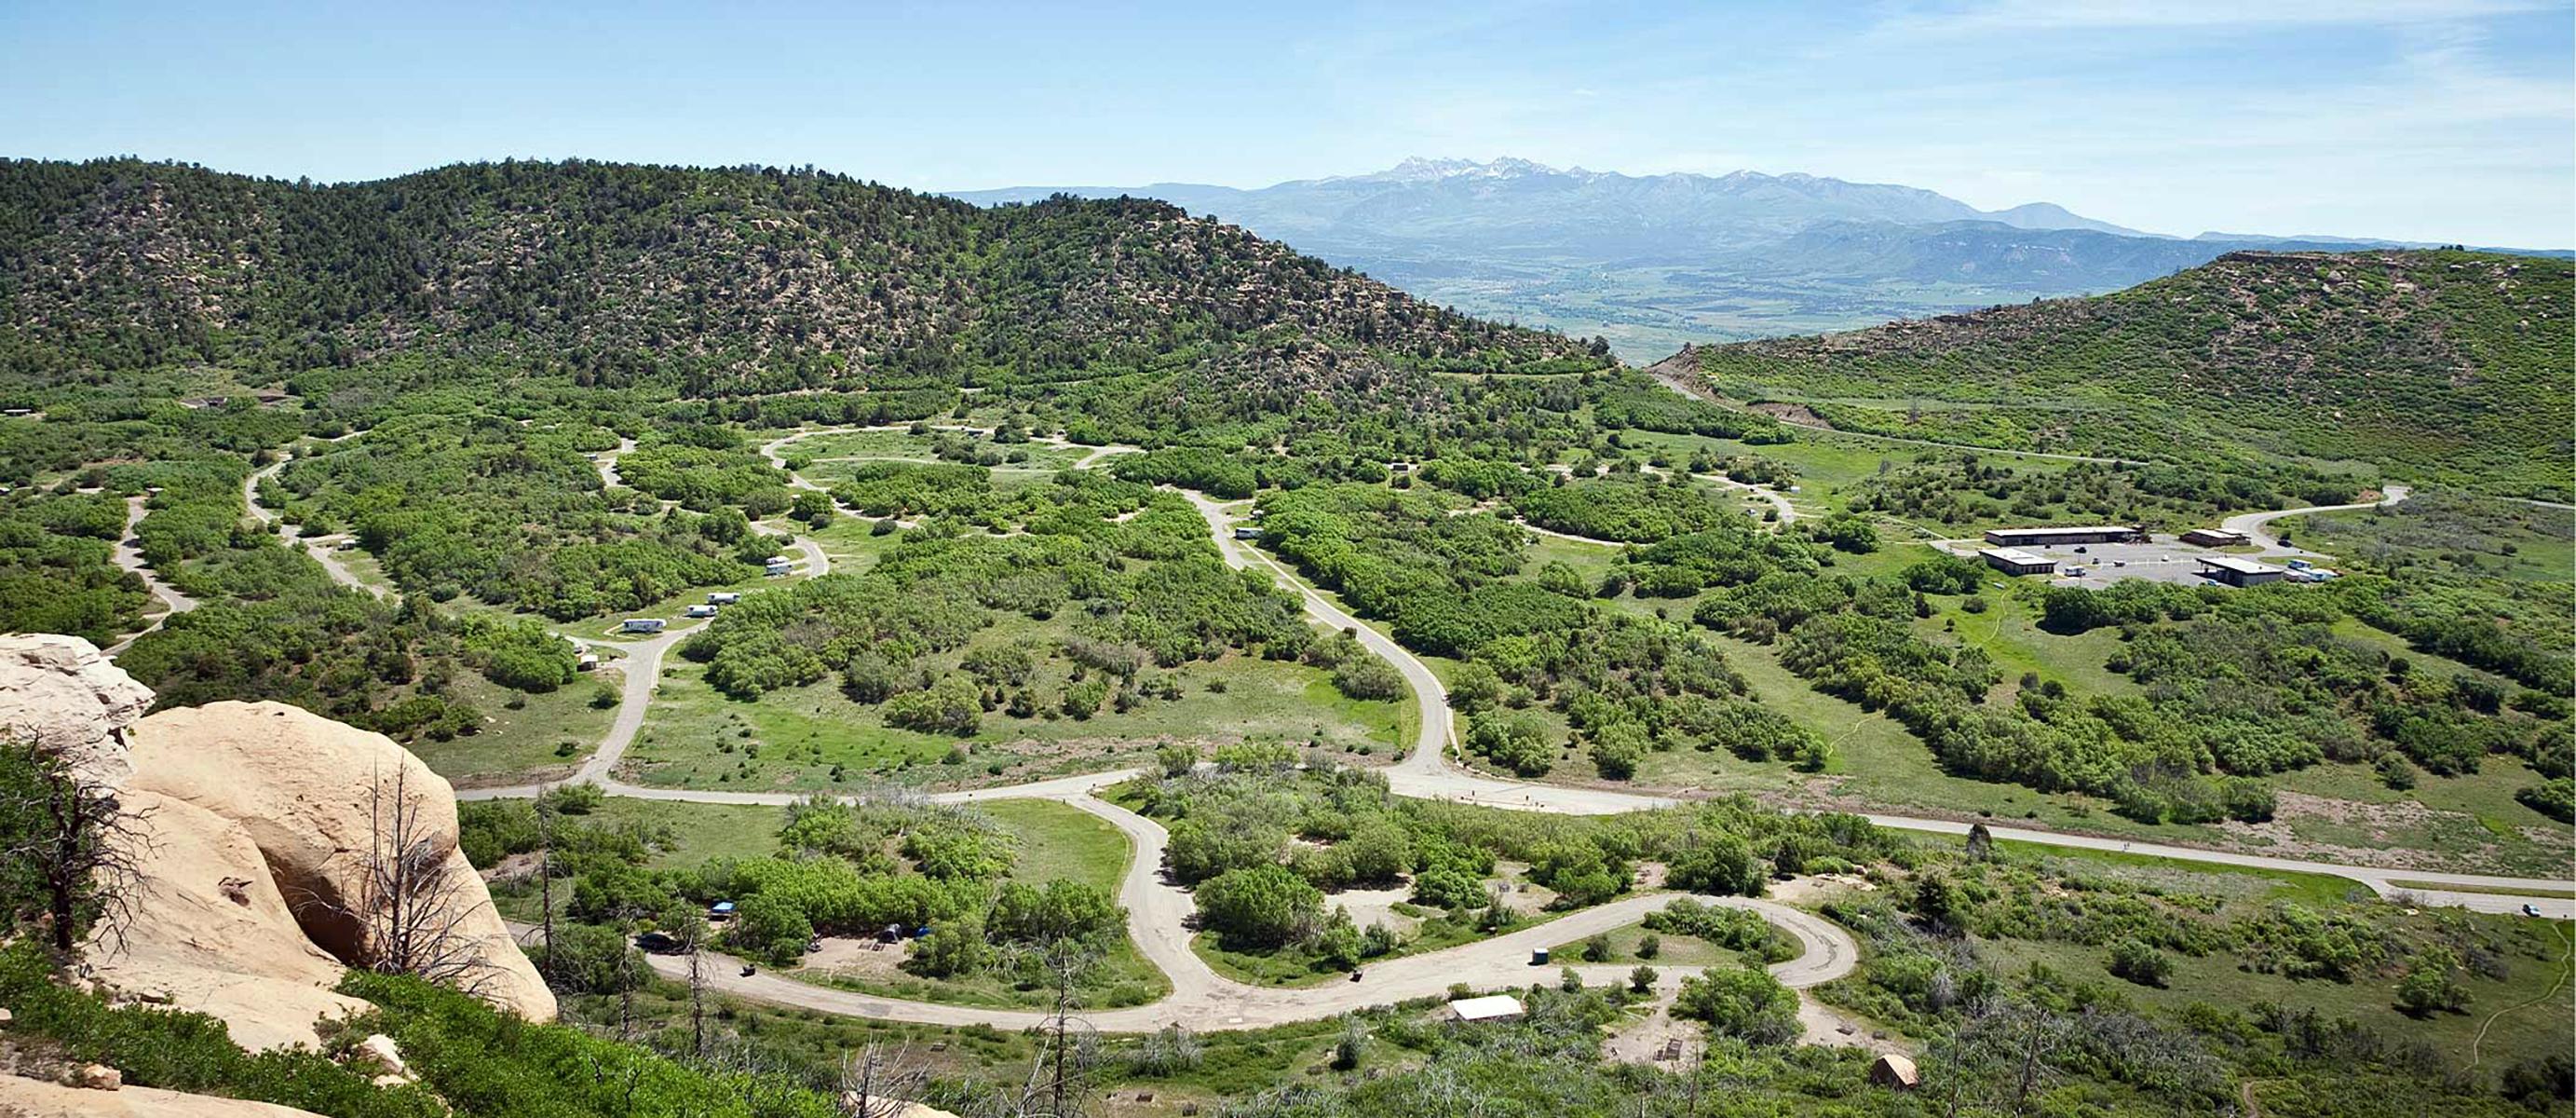 Expansive, overhead view of loop roads and campsites within a green valley surrounded by hills